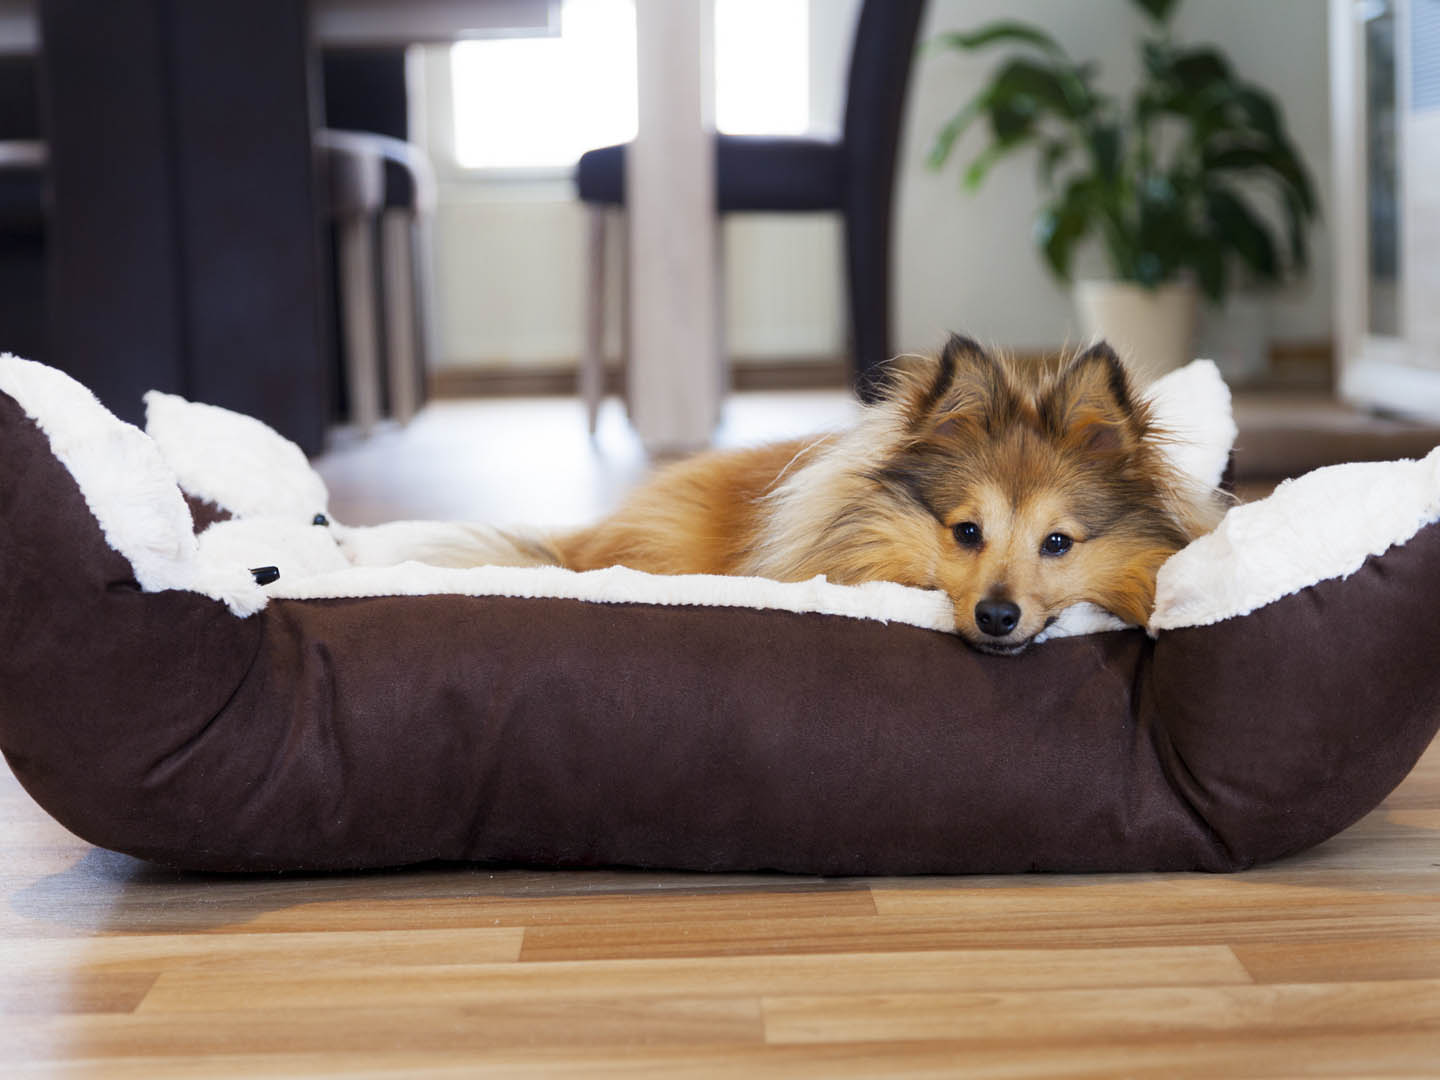 Keep Pets Out of Your Bed? - Dr. Weil